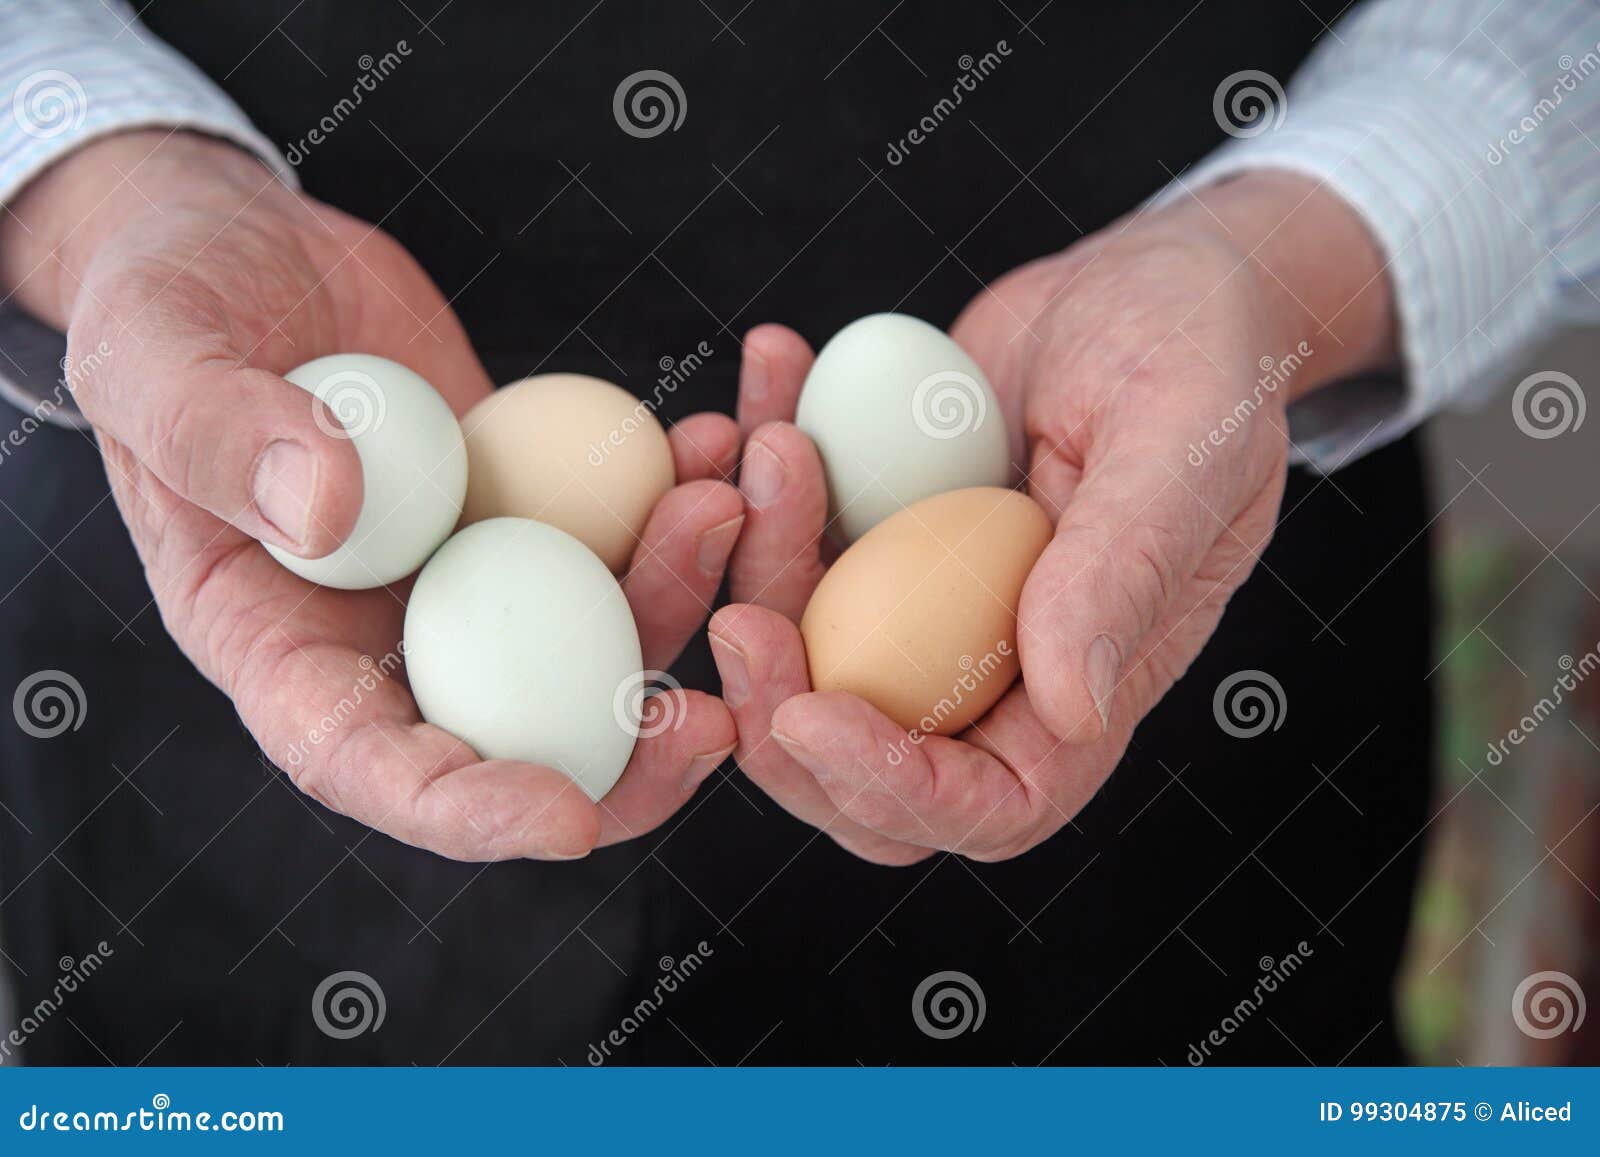 Organic Araucana eggs. A man in a black apron holds several araucana eggs with room for text